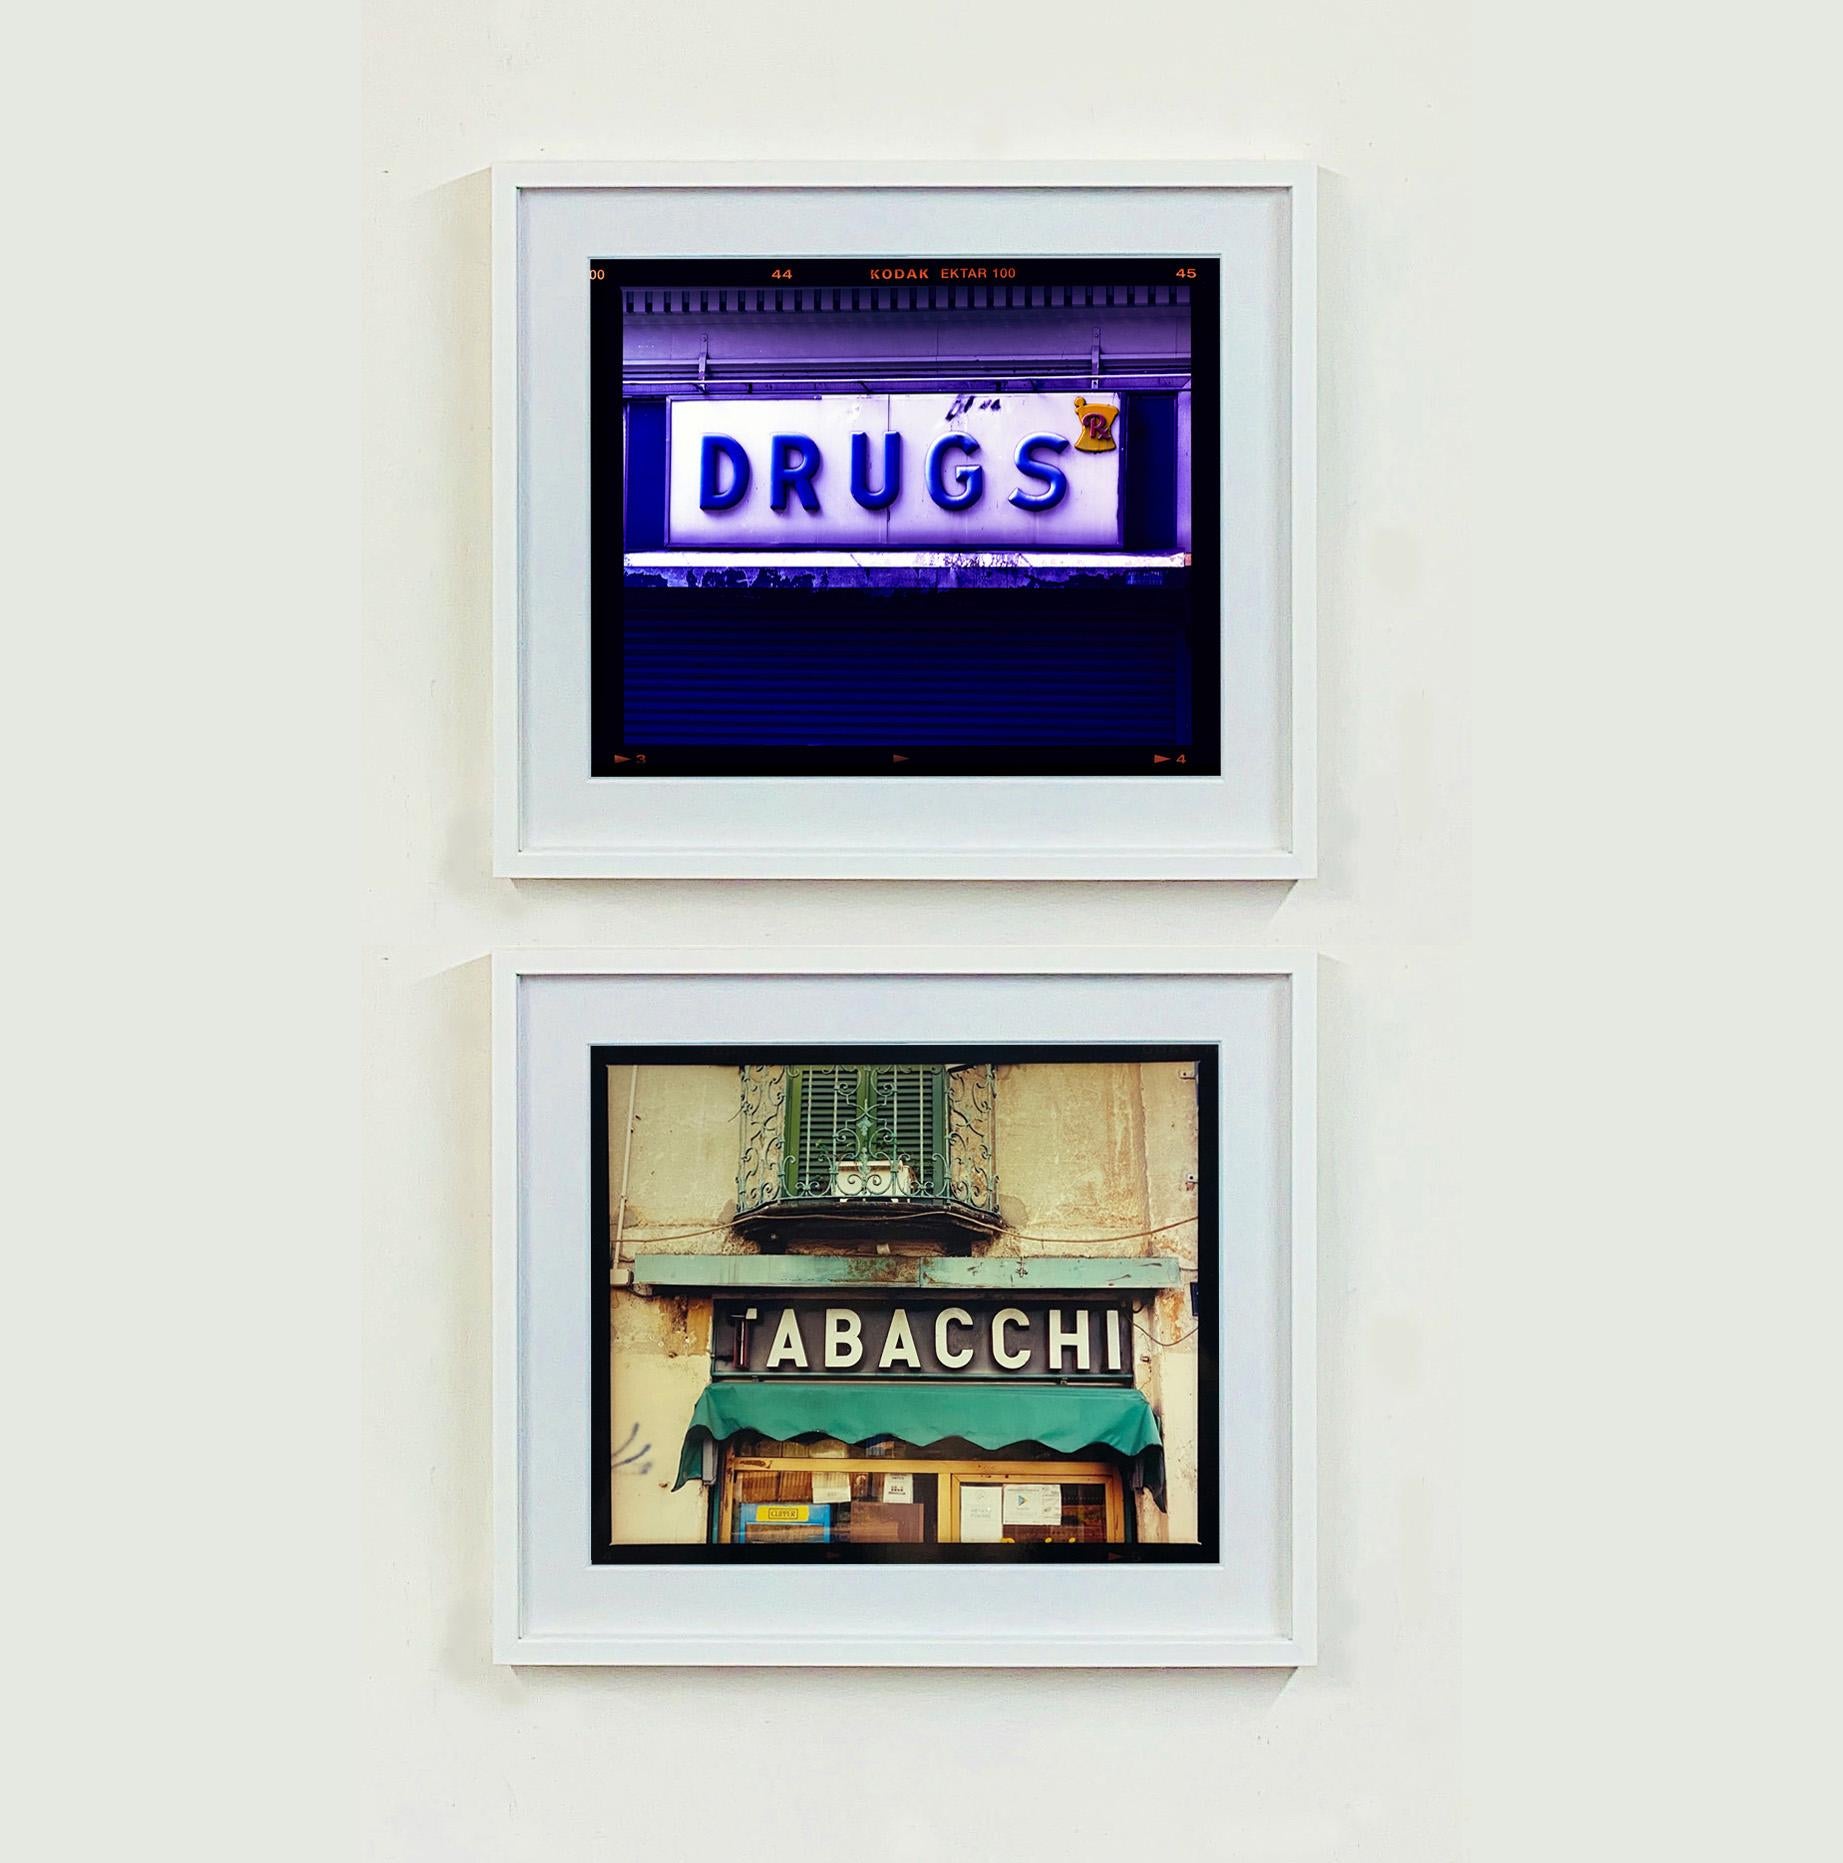 Drugs, part of Richard's portfolio of street photography he is building up which depict the colour, fabric and structure of cities with distinct style. As New York changes in the face of development Richard is keen to capture original